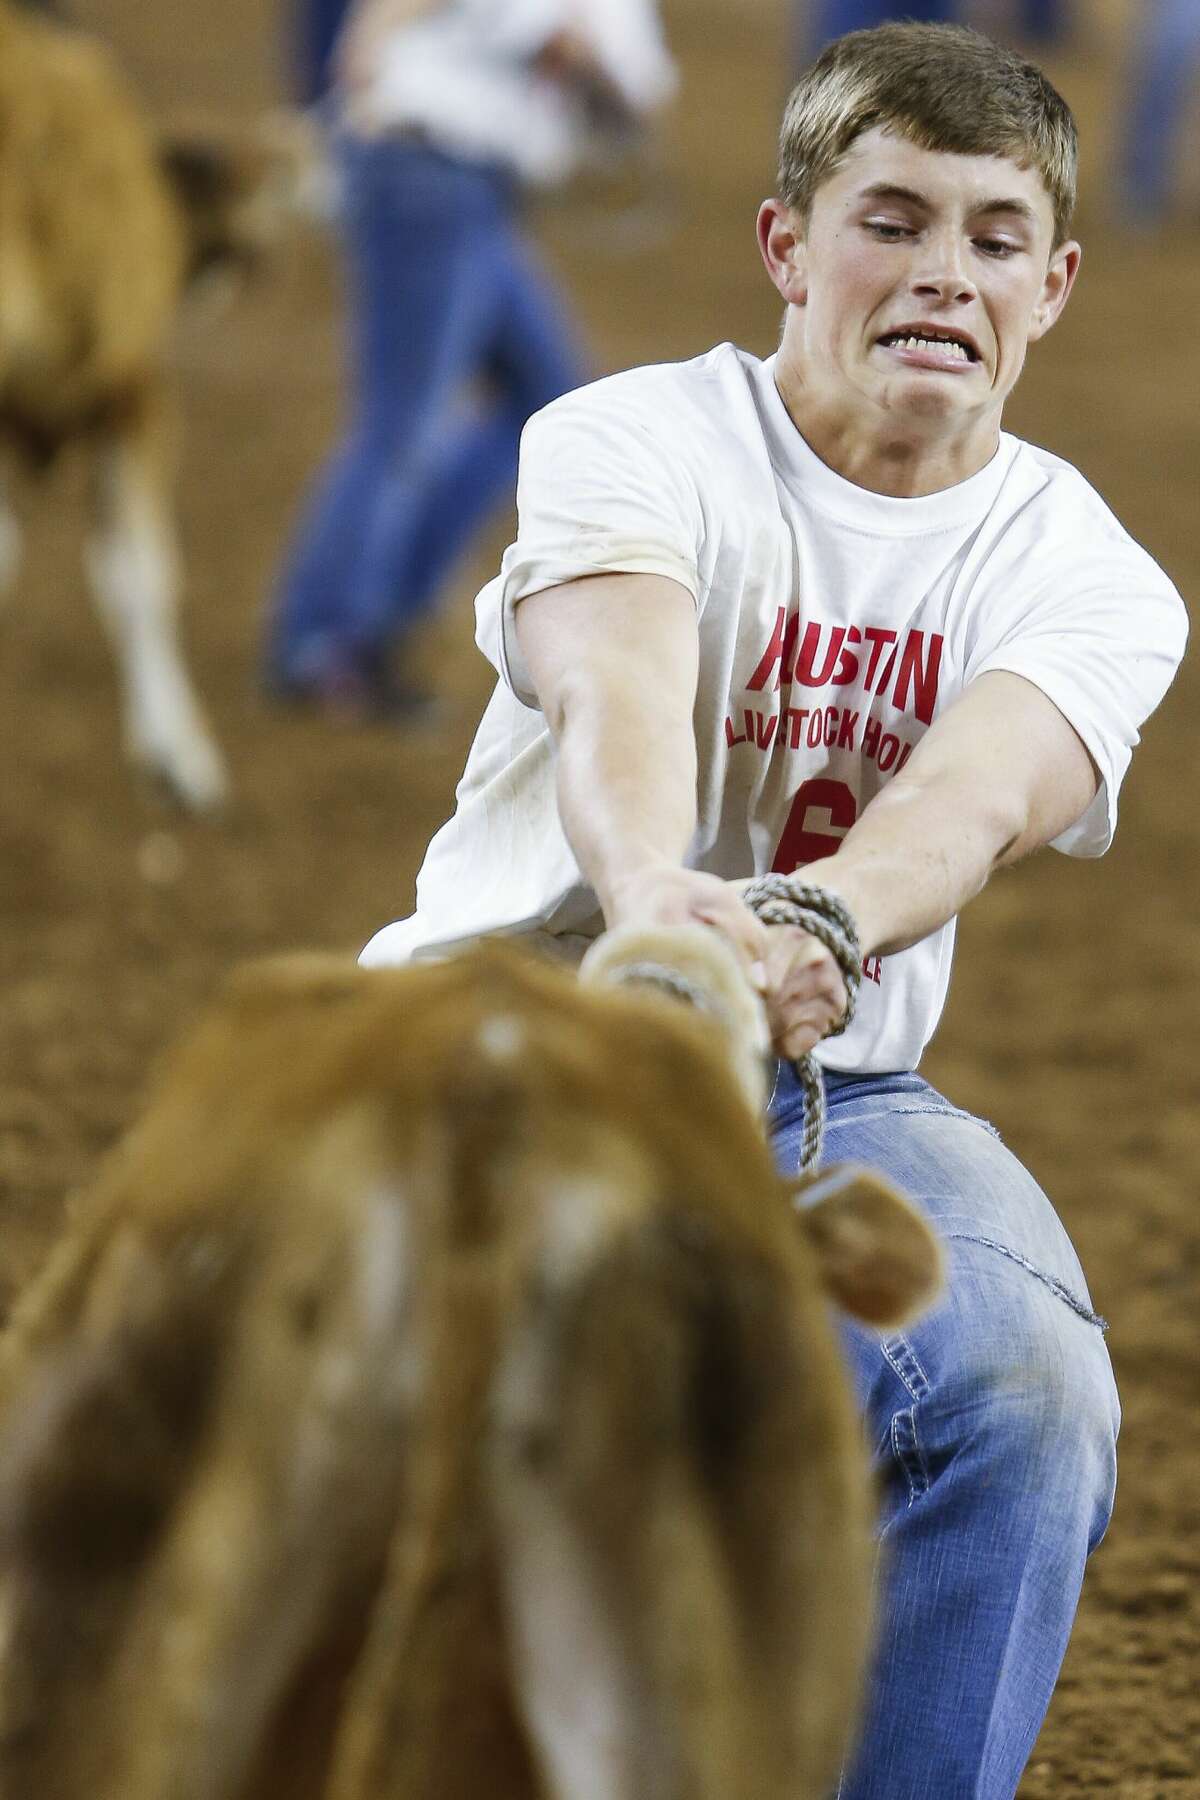 Calf scrambler Trent Stefka struggles to bring the calf he caught back into the center of the arena during round three of Super Series III at the Houston Livestock Show and Rodeo Wednesday, March 15, 2017 in Houston. ( Michael Ciaglo / Houston Chronicle )